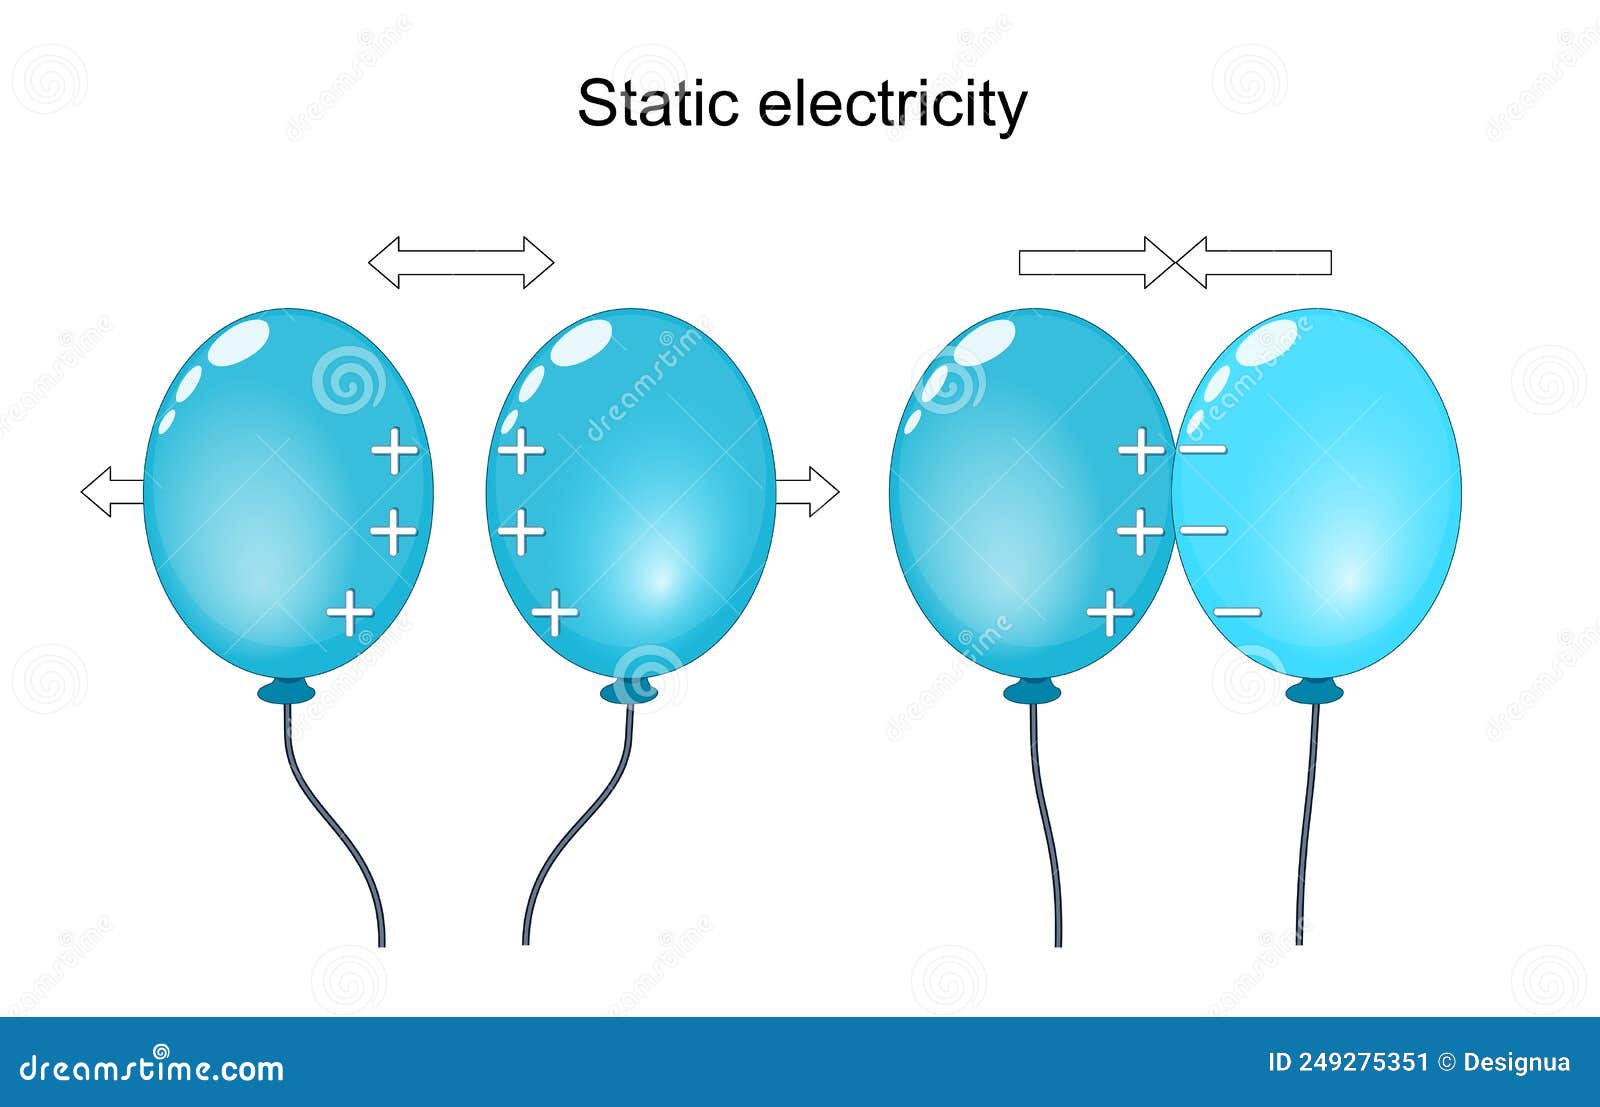 static electricity. electrostatic in balloons